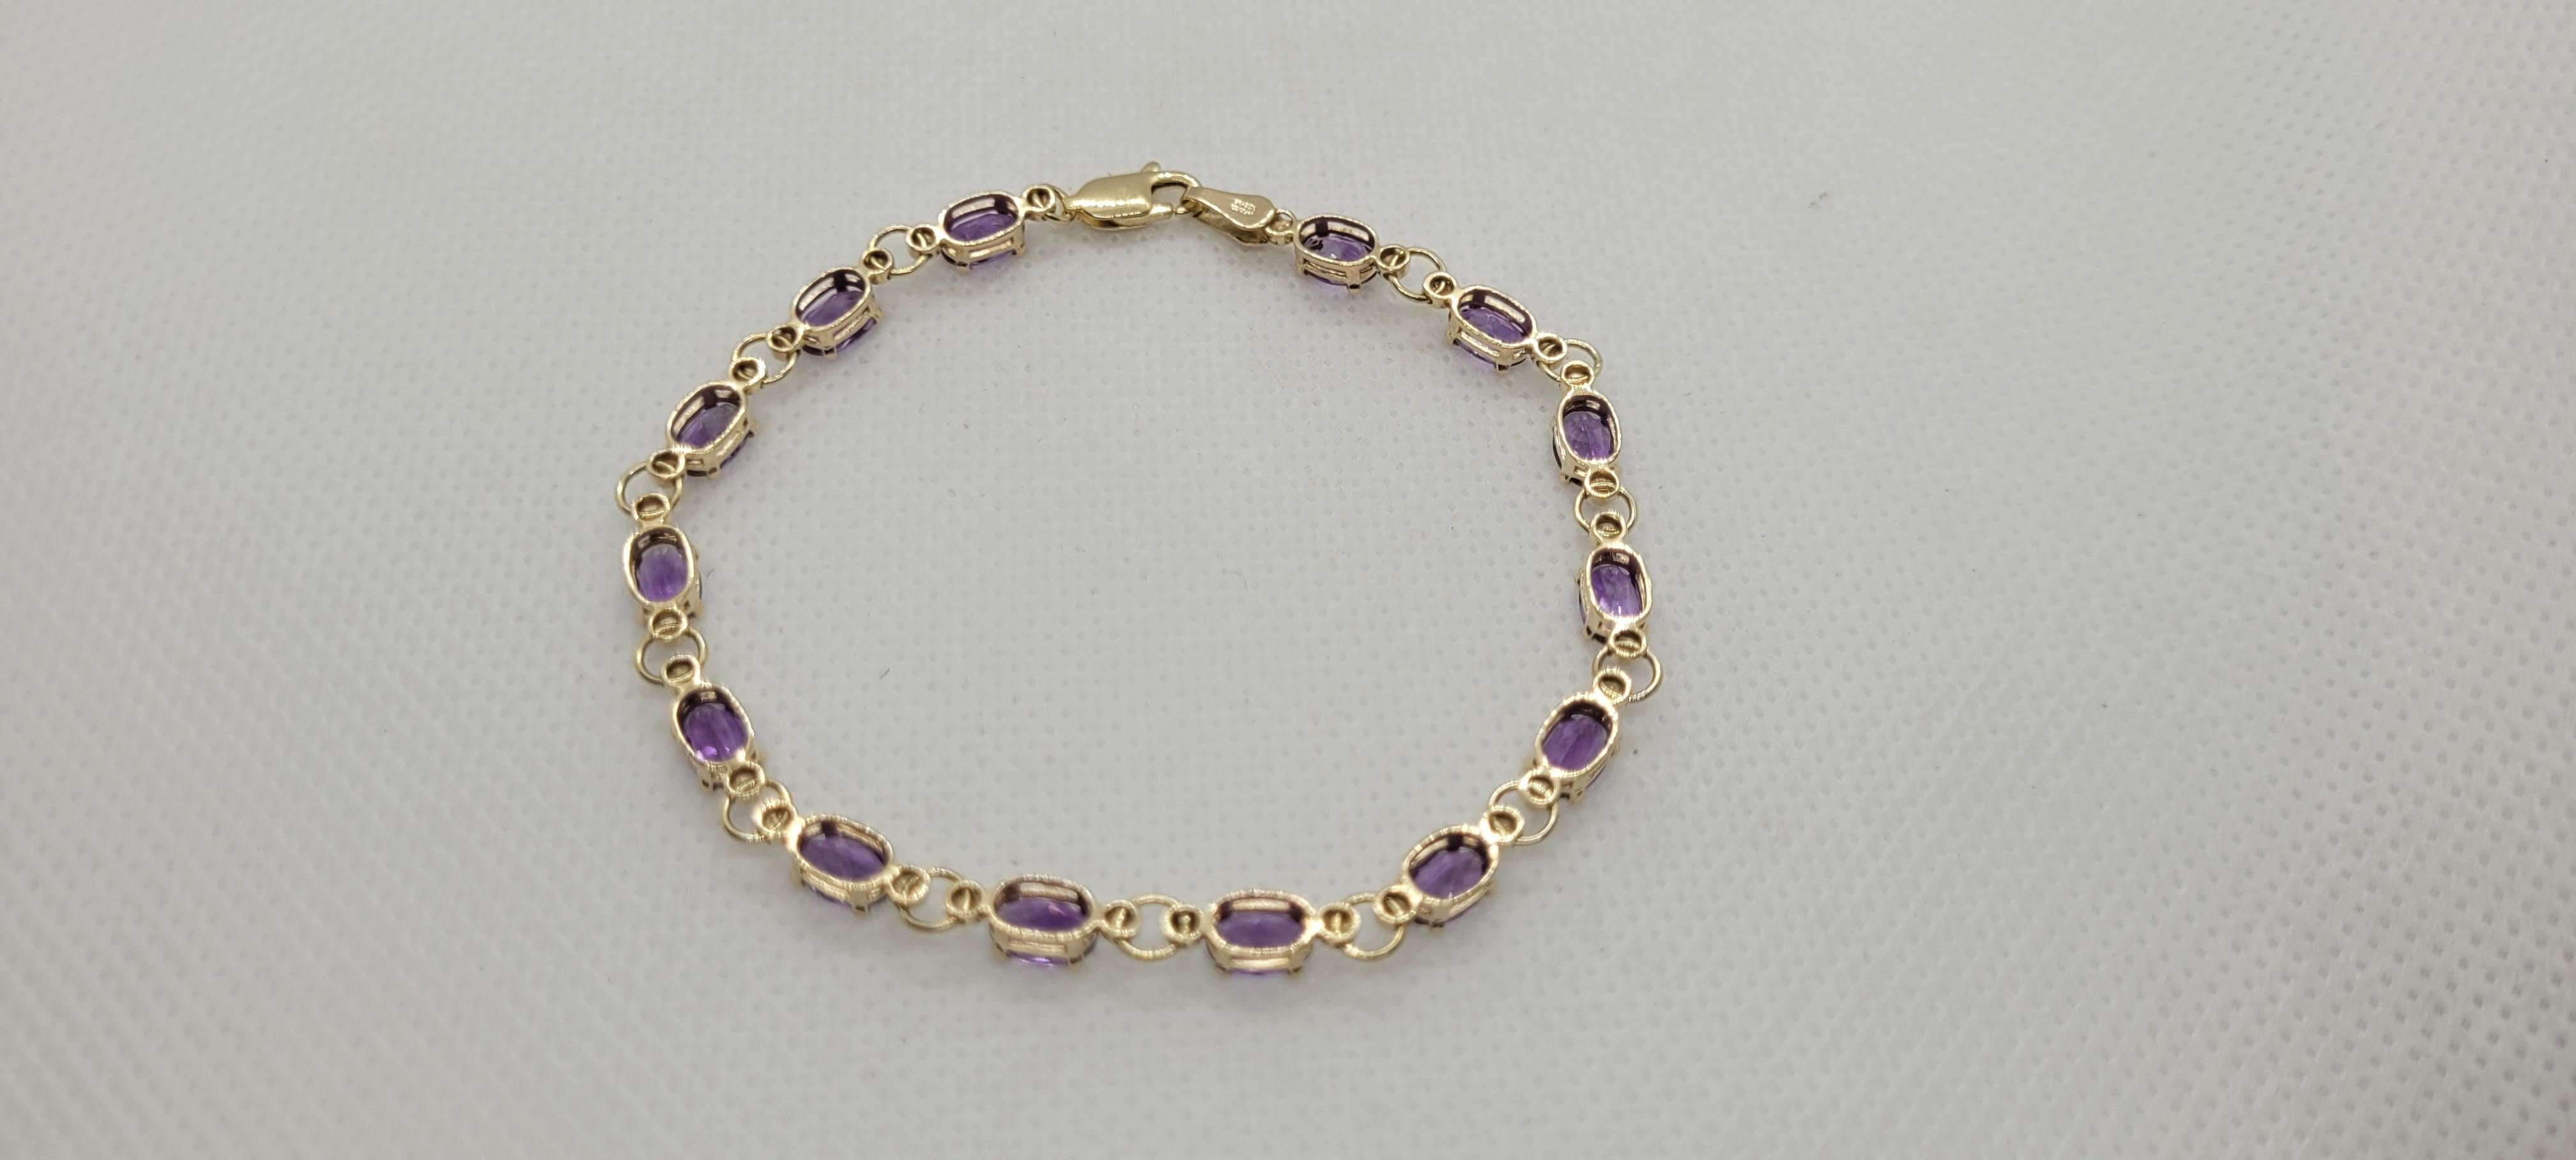 Oval Cut Yellow Gold Amethyst Bracelet, 6 x 4 mm Oval Amethyst, 10kt Gold, 7.25 Inches For Sale